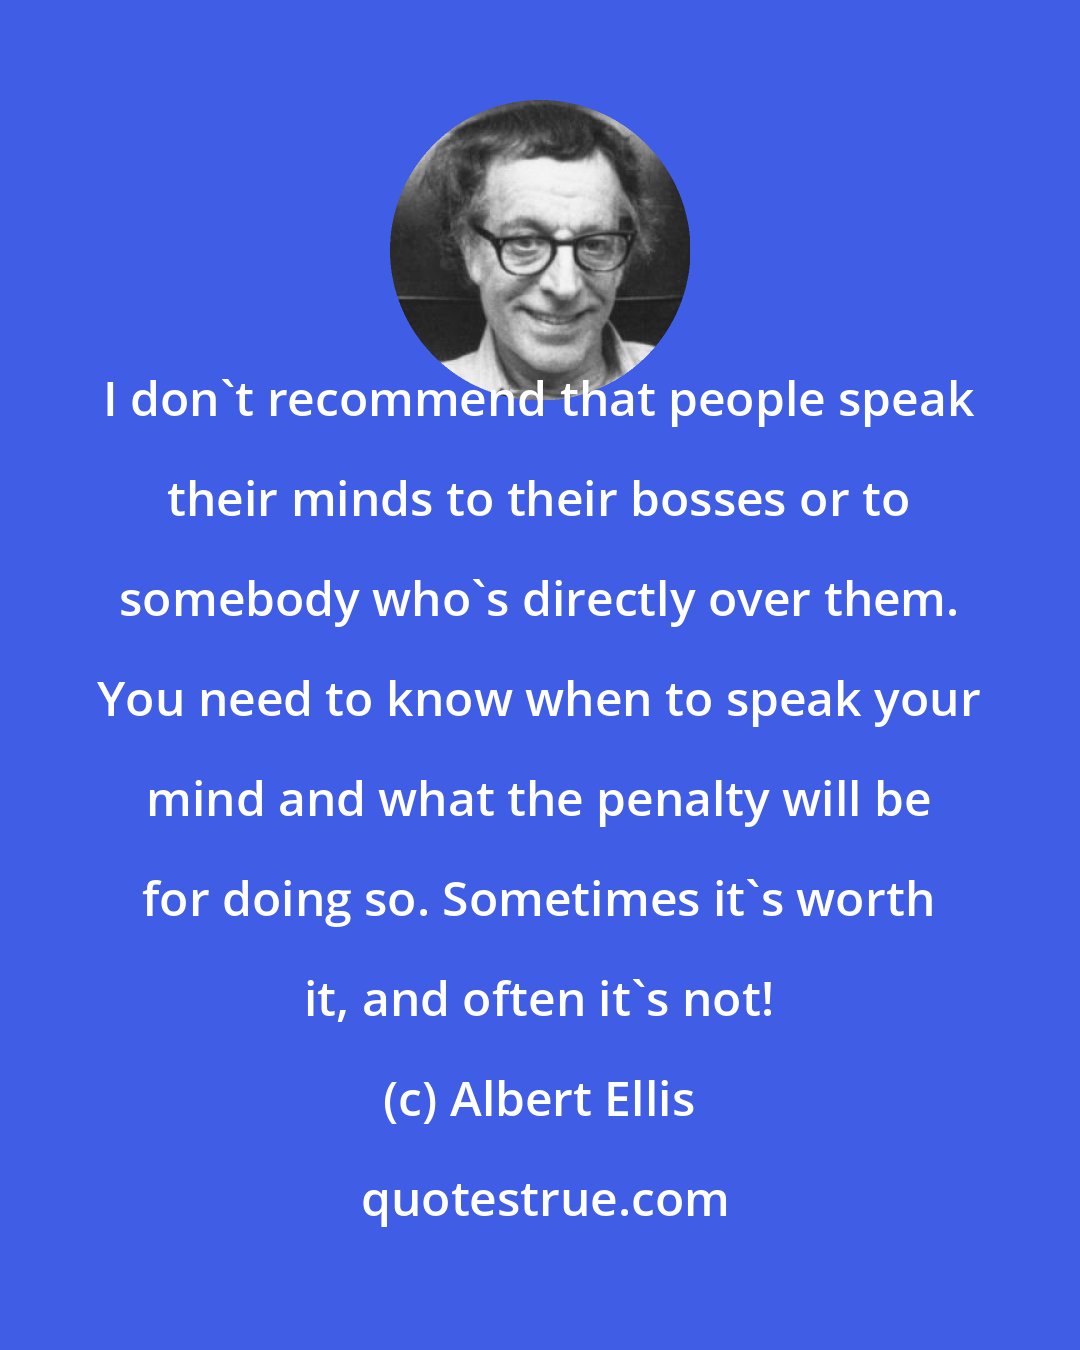 Albert Ellis: I don't recommend that people speak their minds to their bosses or to somebody who's directly over them. You need to know when to speak your mind and what the penalty will be for doing so. Sometimes it's worth it, and often it's not!